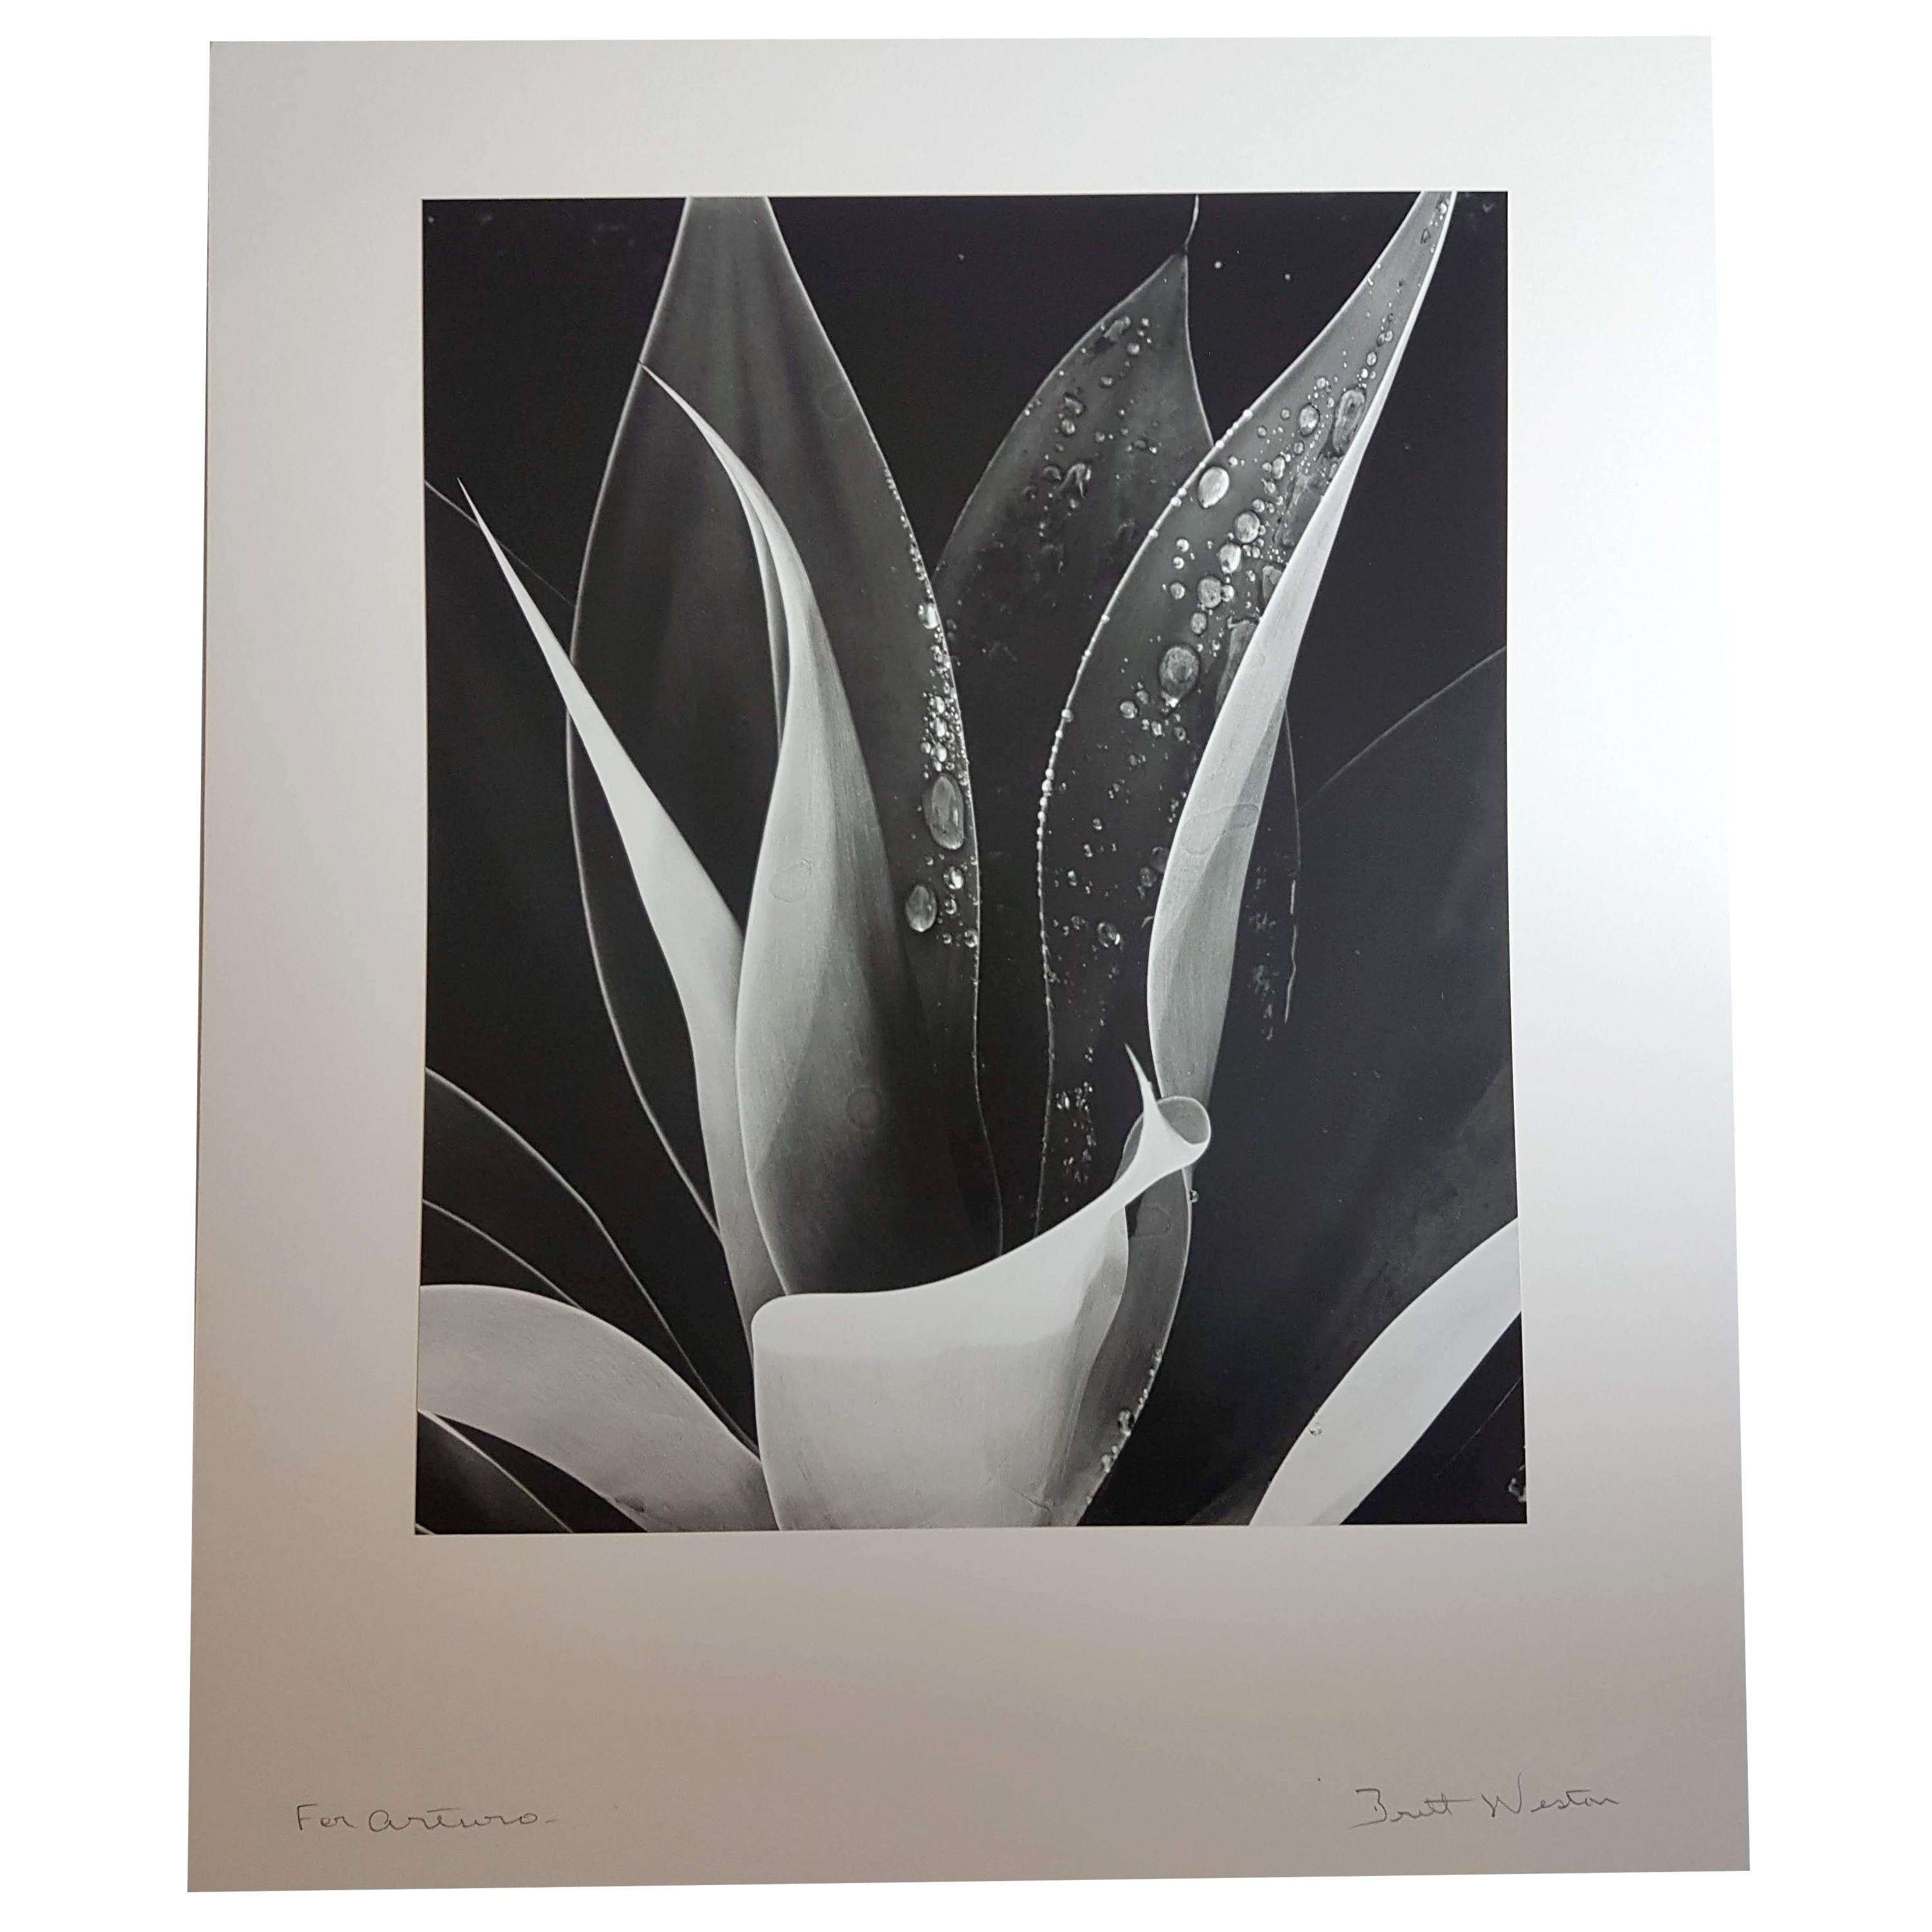 Outstanding silver gelatin photograph depicting an agave plant sprayed with dew by American photographer Brett Weston.

Signed on illustration board. Dedicated 